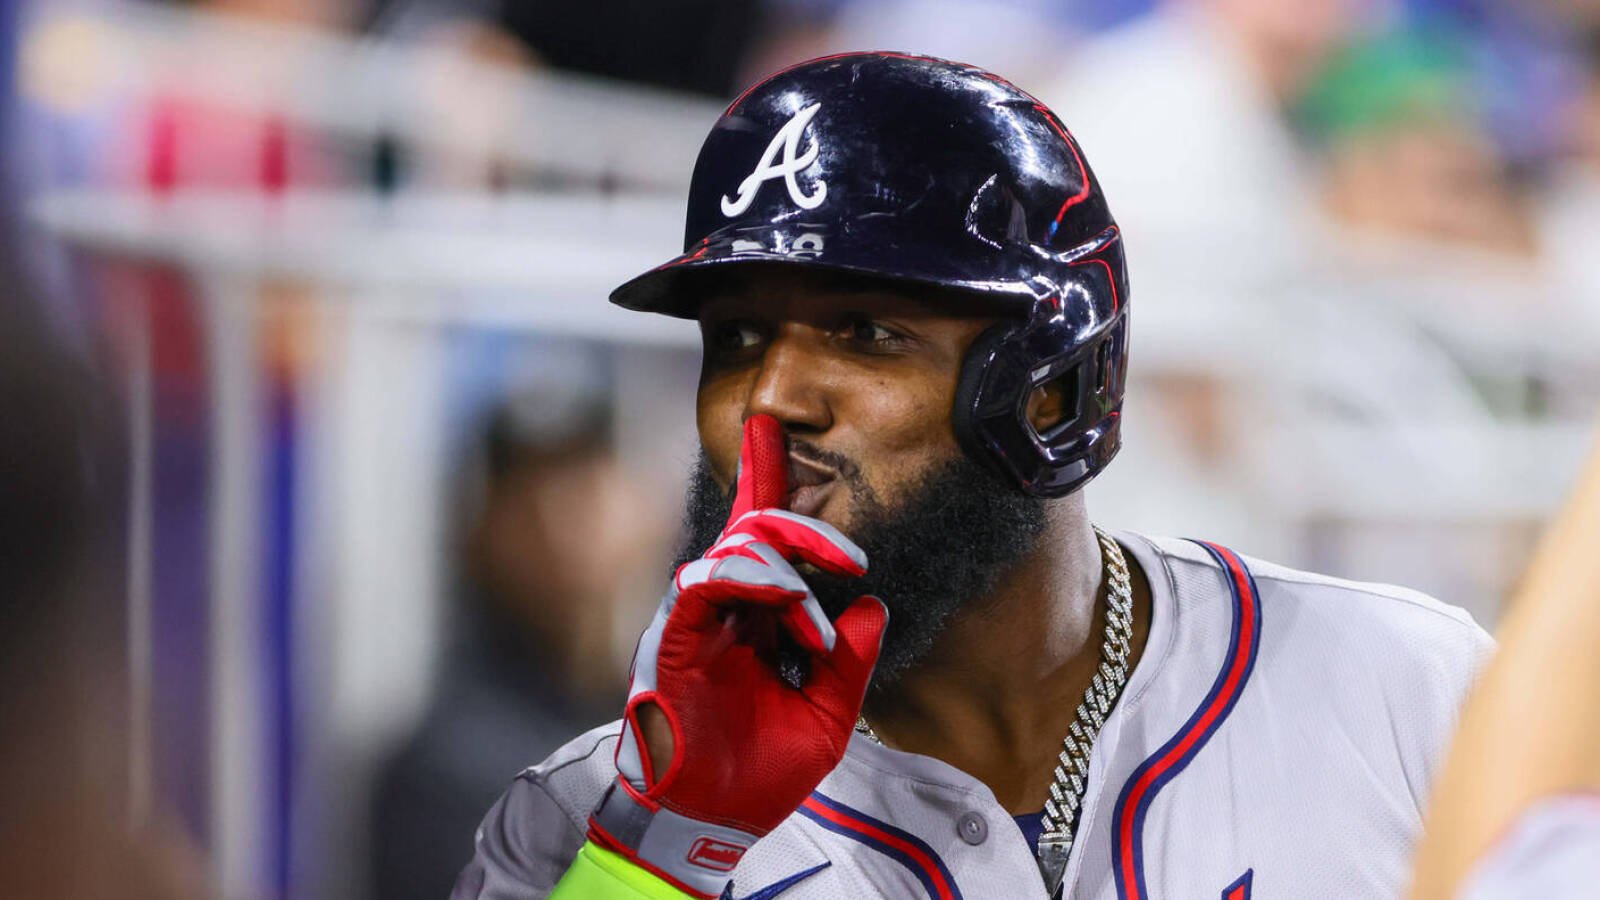 Watch: Ozuna hits go-ahead HR to propel Braves over Marlins